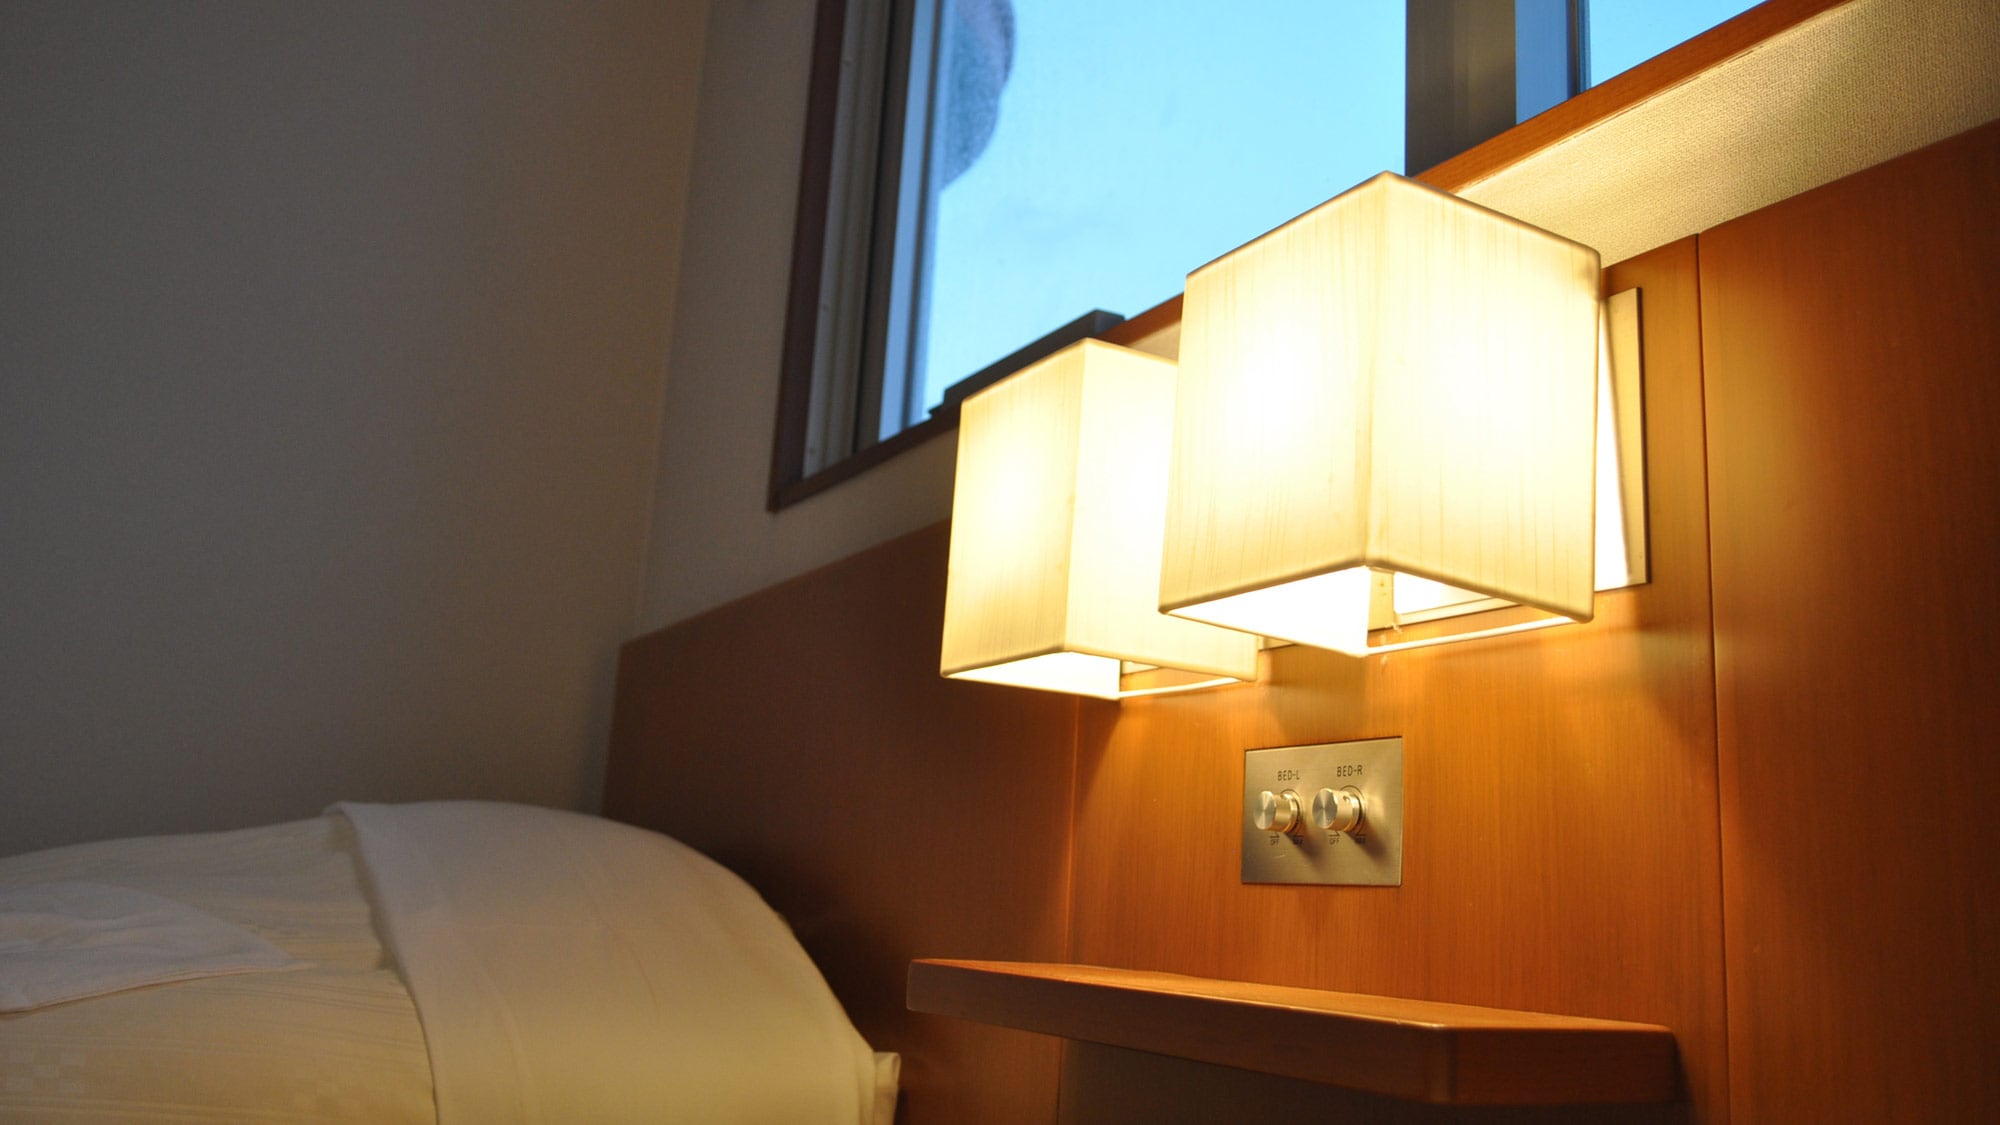 [Guest room lamp] Warm lights will heal the tiredness of your trip.